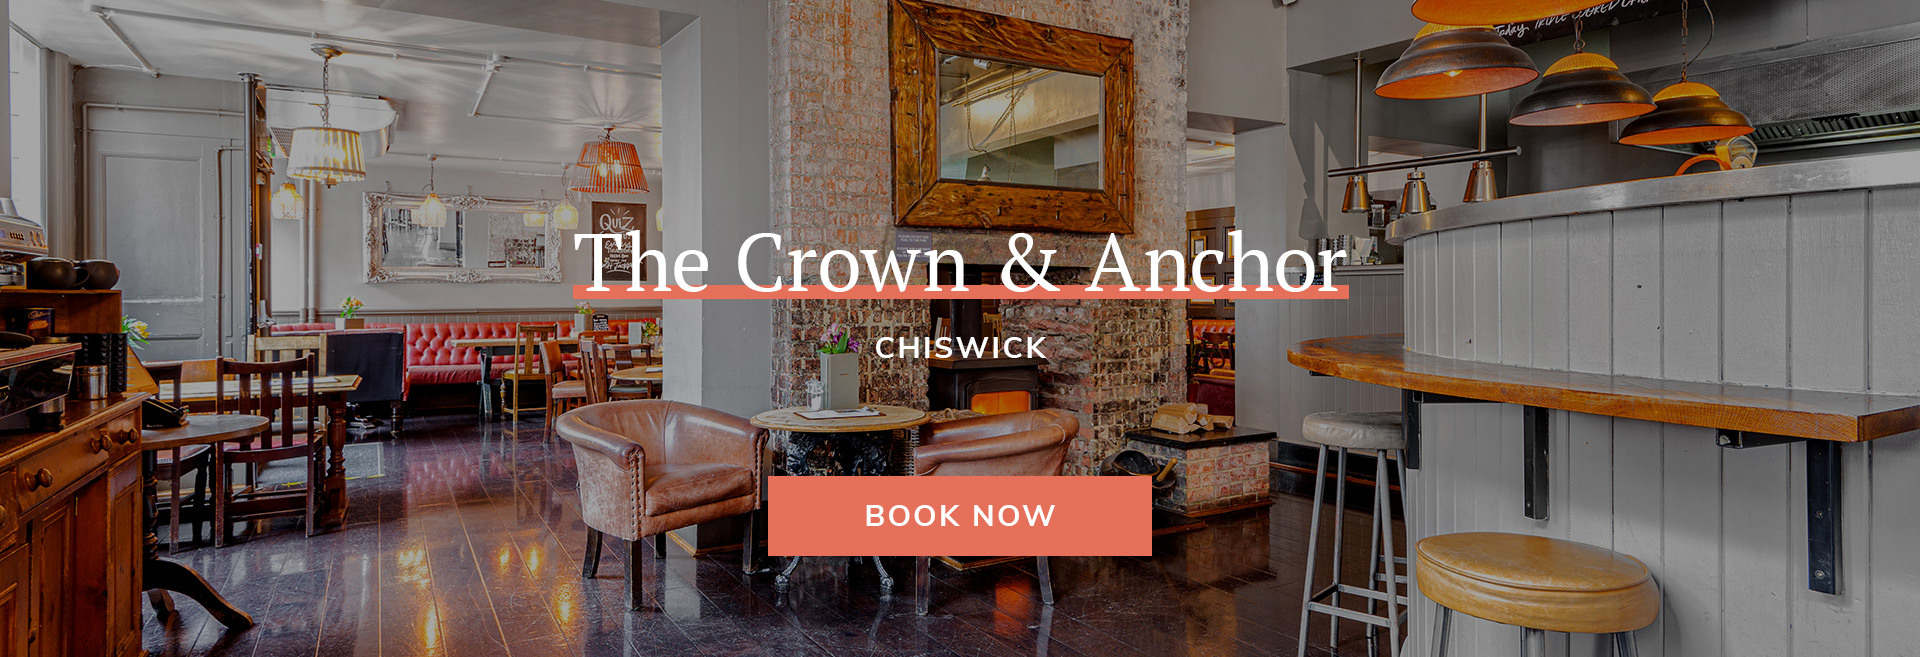 The Crown and Anchor Chiswick Banner 2